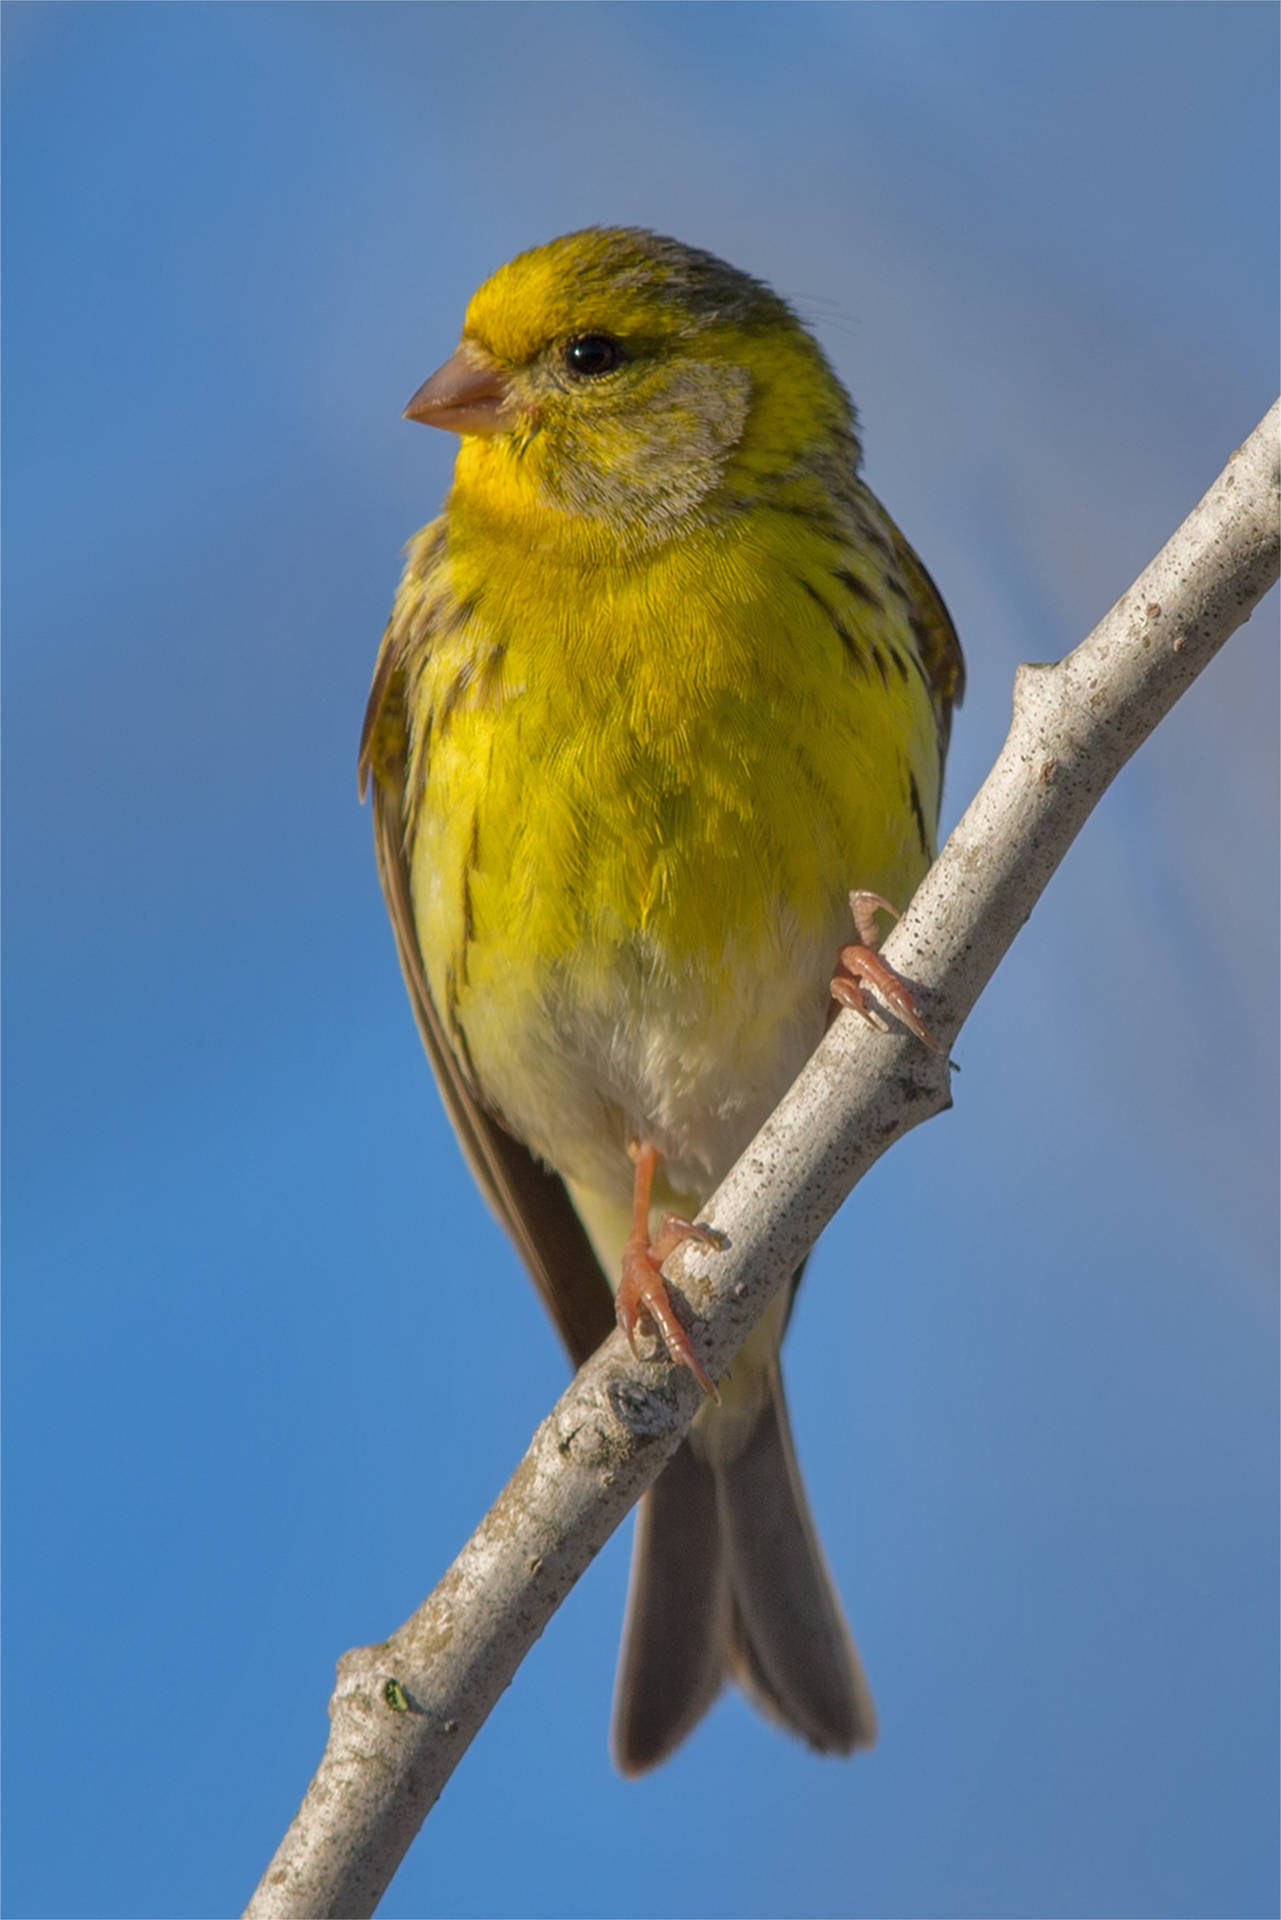 Yellow Canary Bird On Wooden Branch Wallpaper